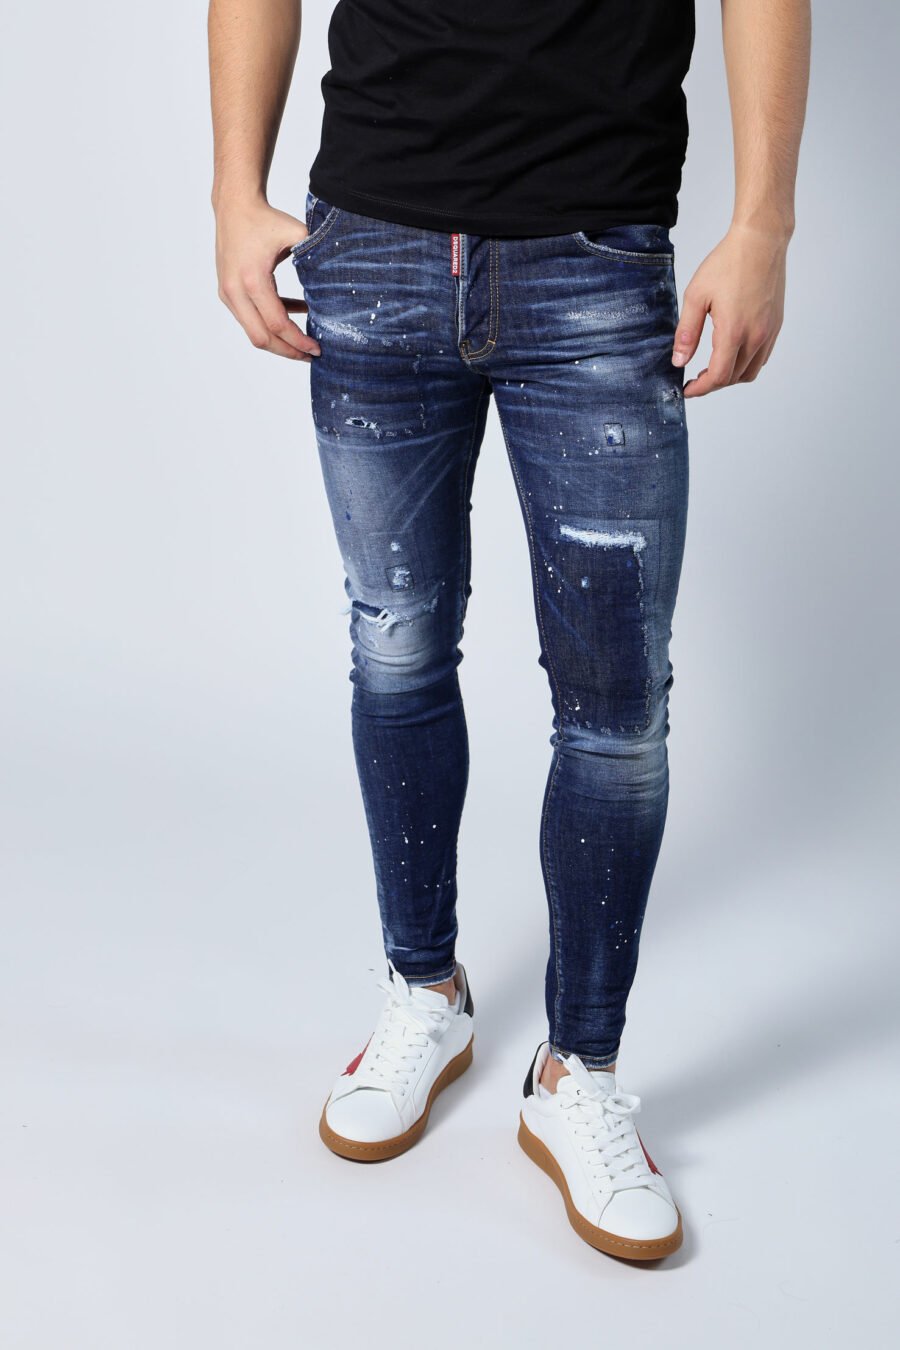 Blue "super twinky jean" jeans with patch and frayed - Untitled Catalog 05665